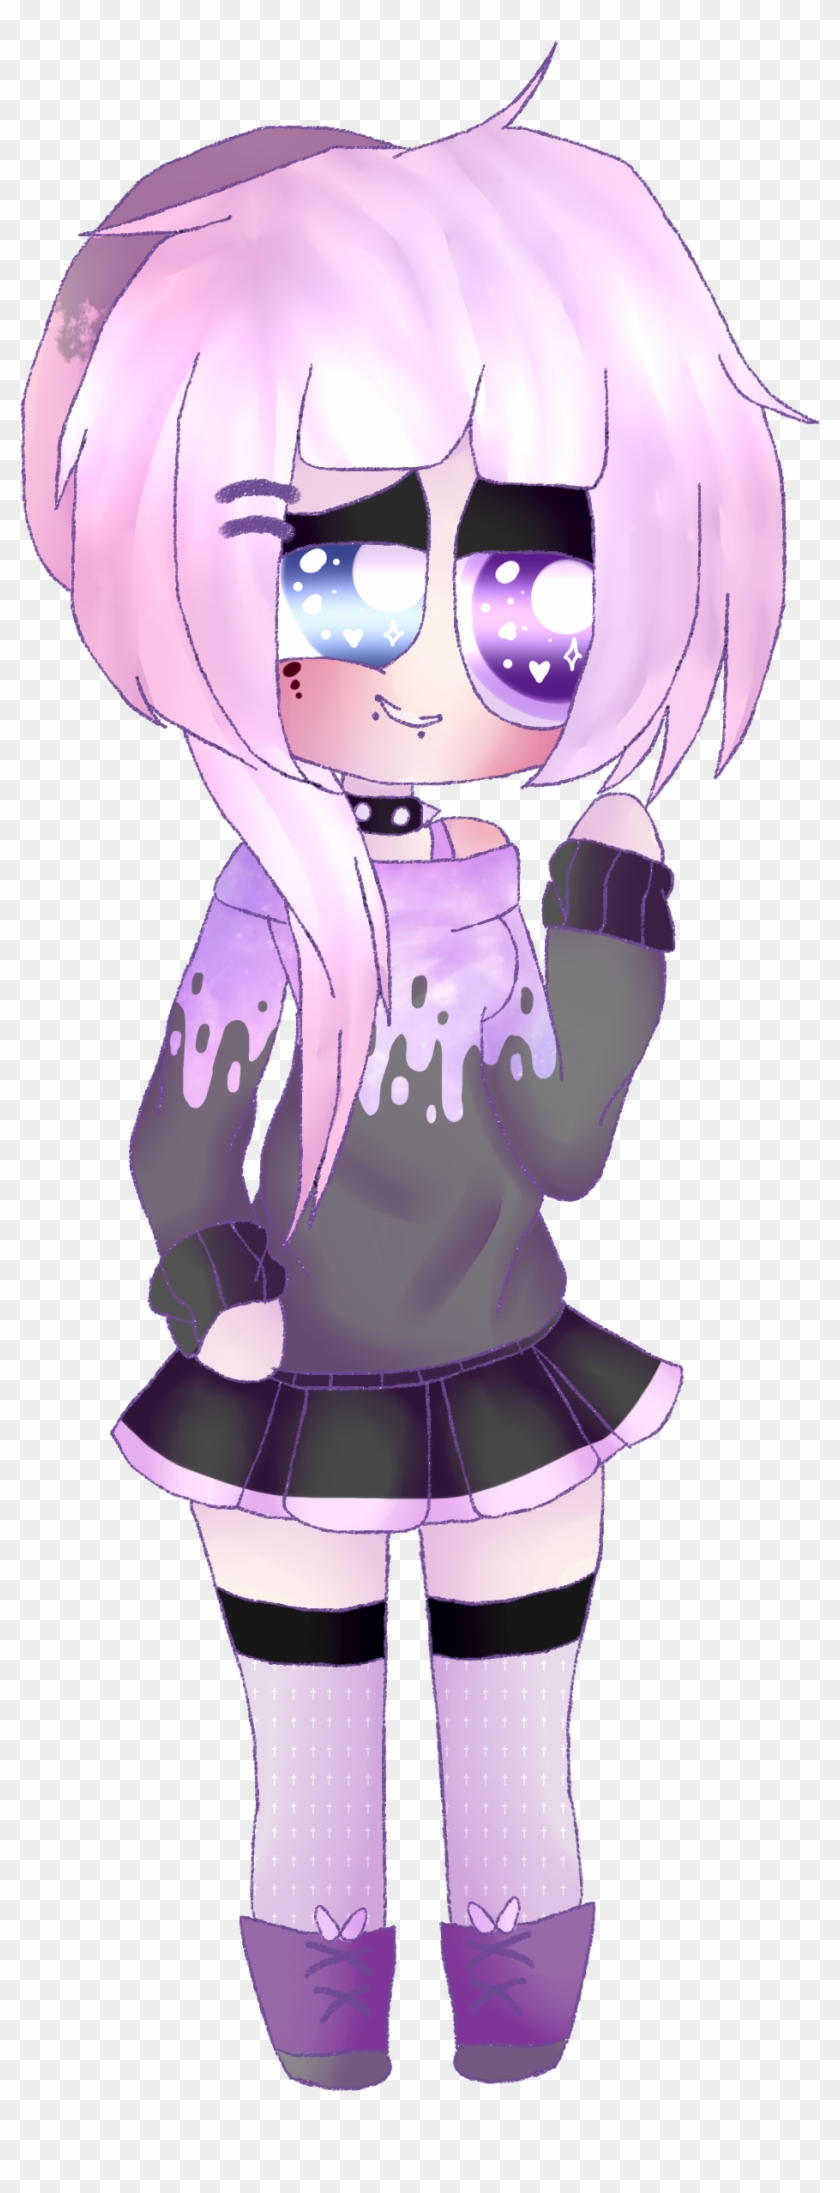 My Pastel Goth Style By Alicia-chan0 - Ppg Elena Pastel Goth #978707